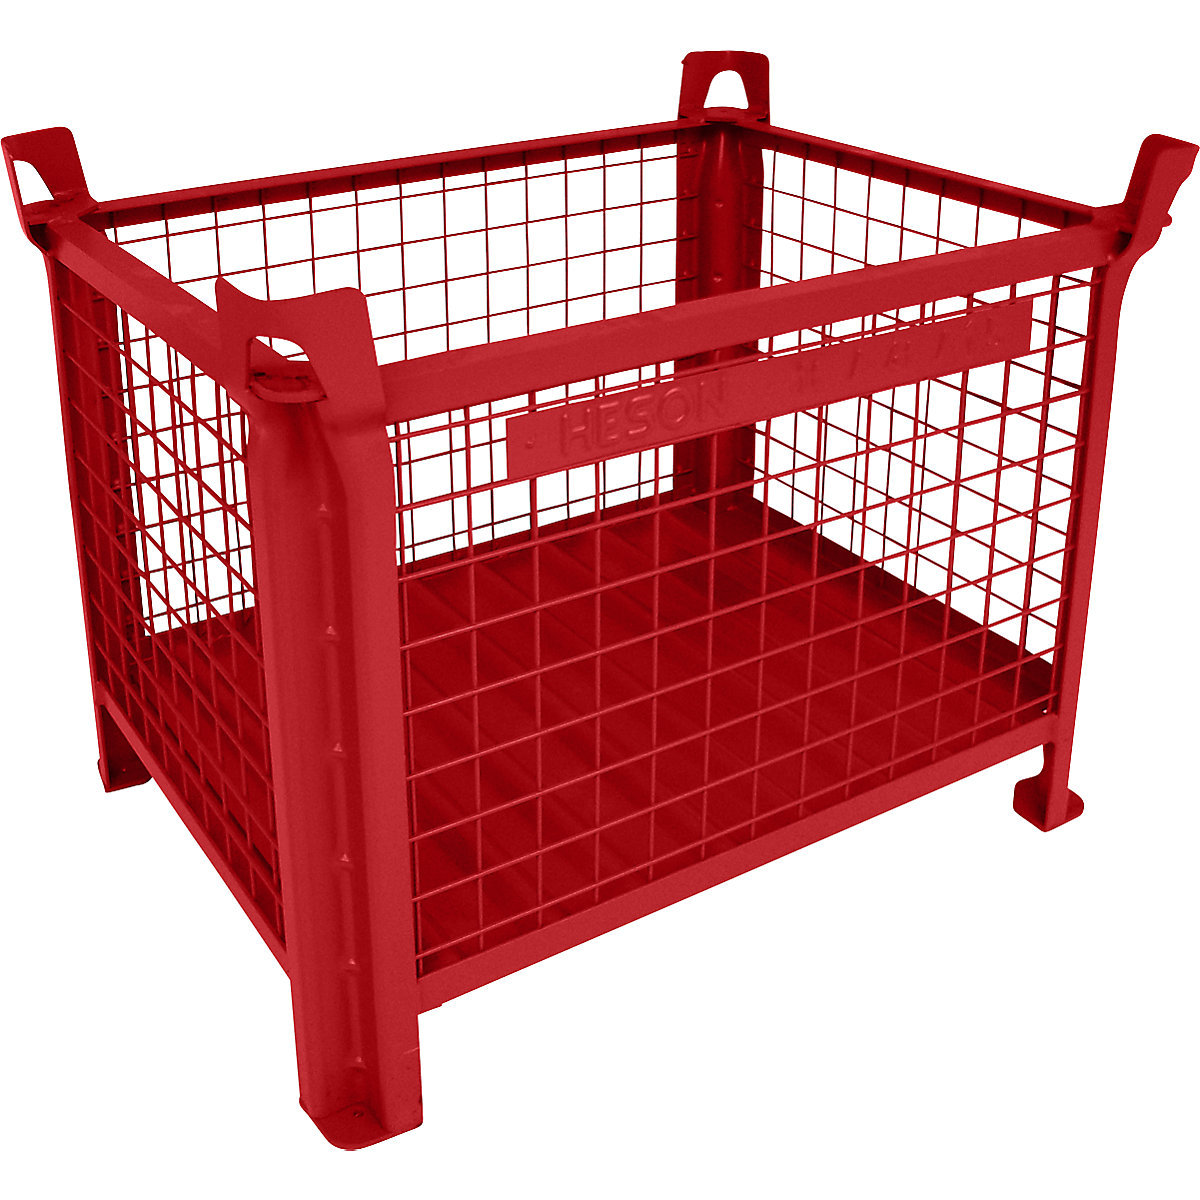 Box pallet with sheet steel base – Heson, LxW 800 x 600 mm, painted red, 5+ items-4